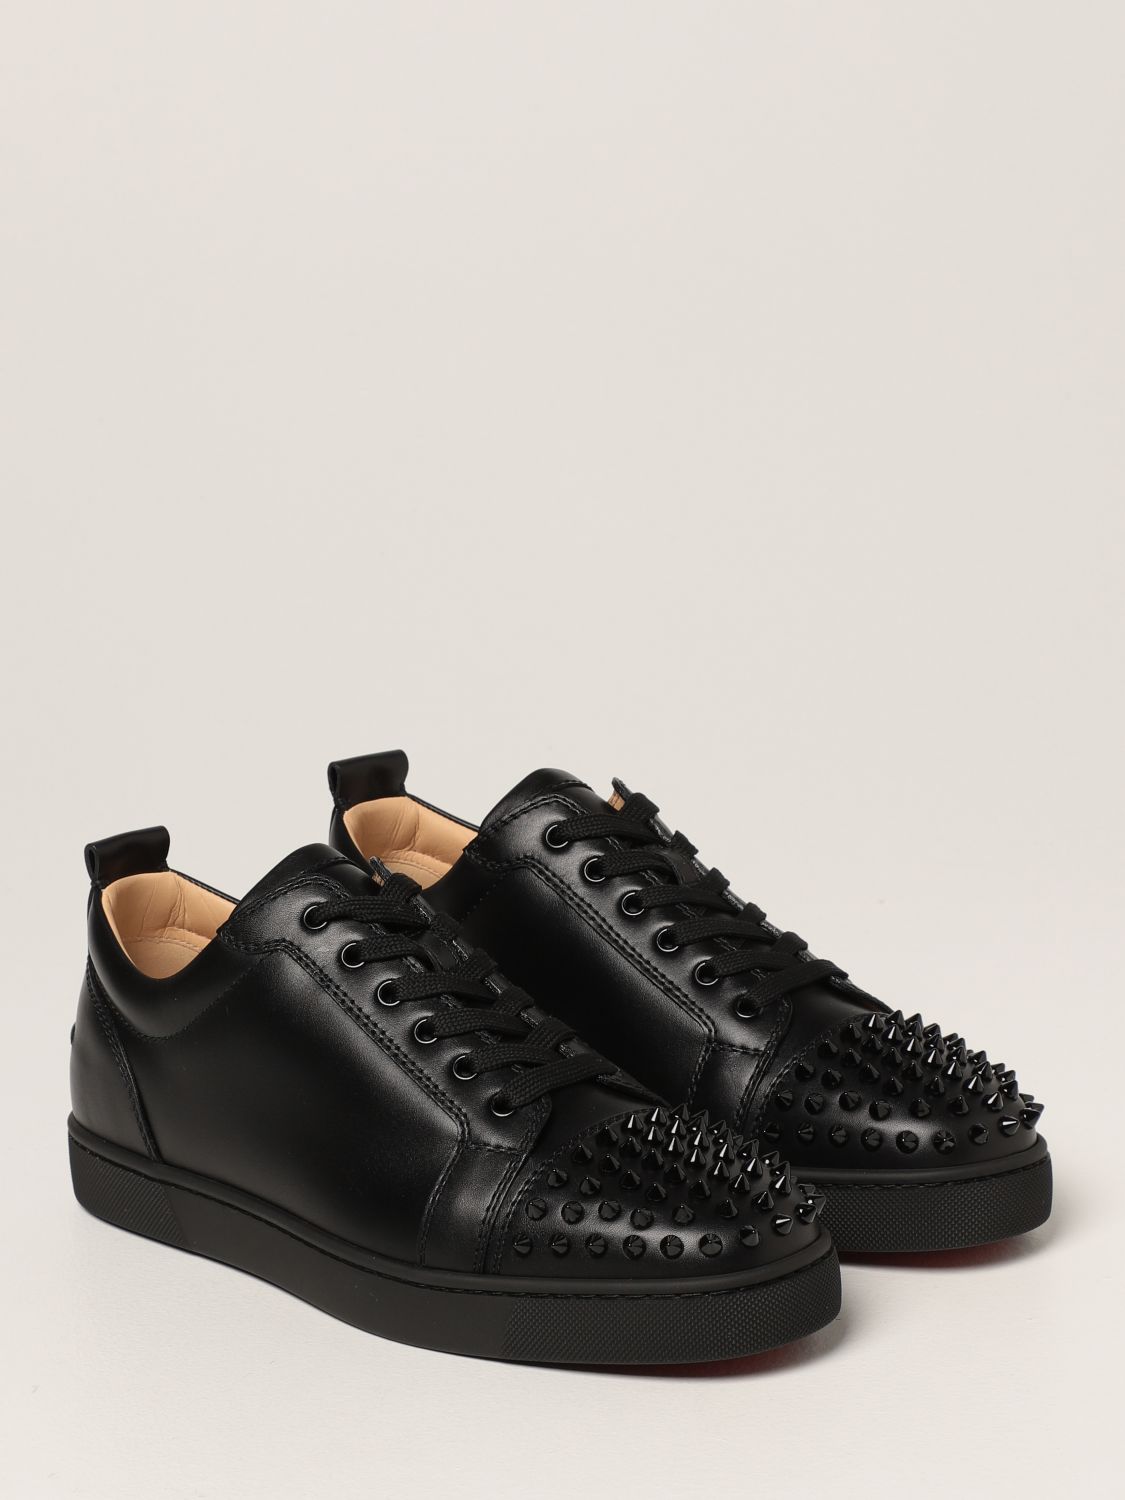 Christian Louboutin Louis Junior Strass Leather Sneakers - ShopStyle  Trainers & Athletic Shoes